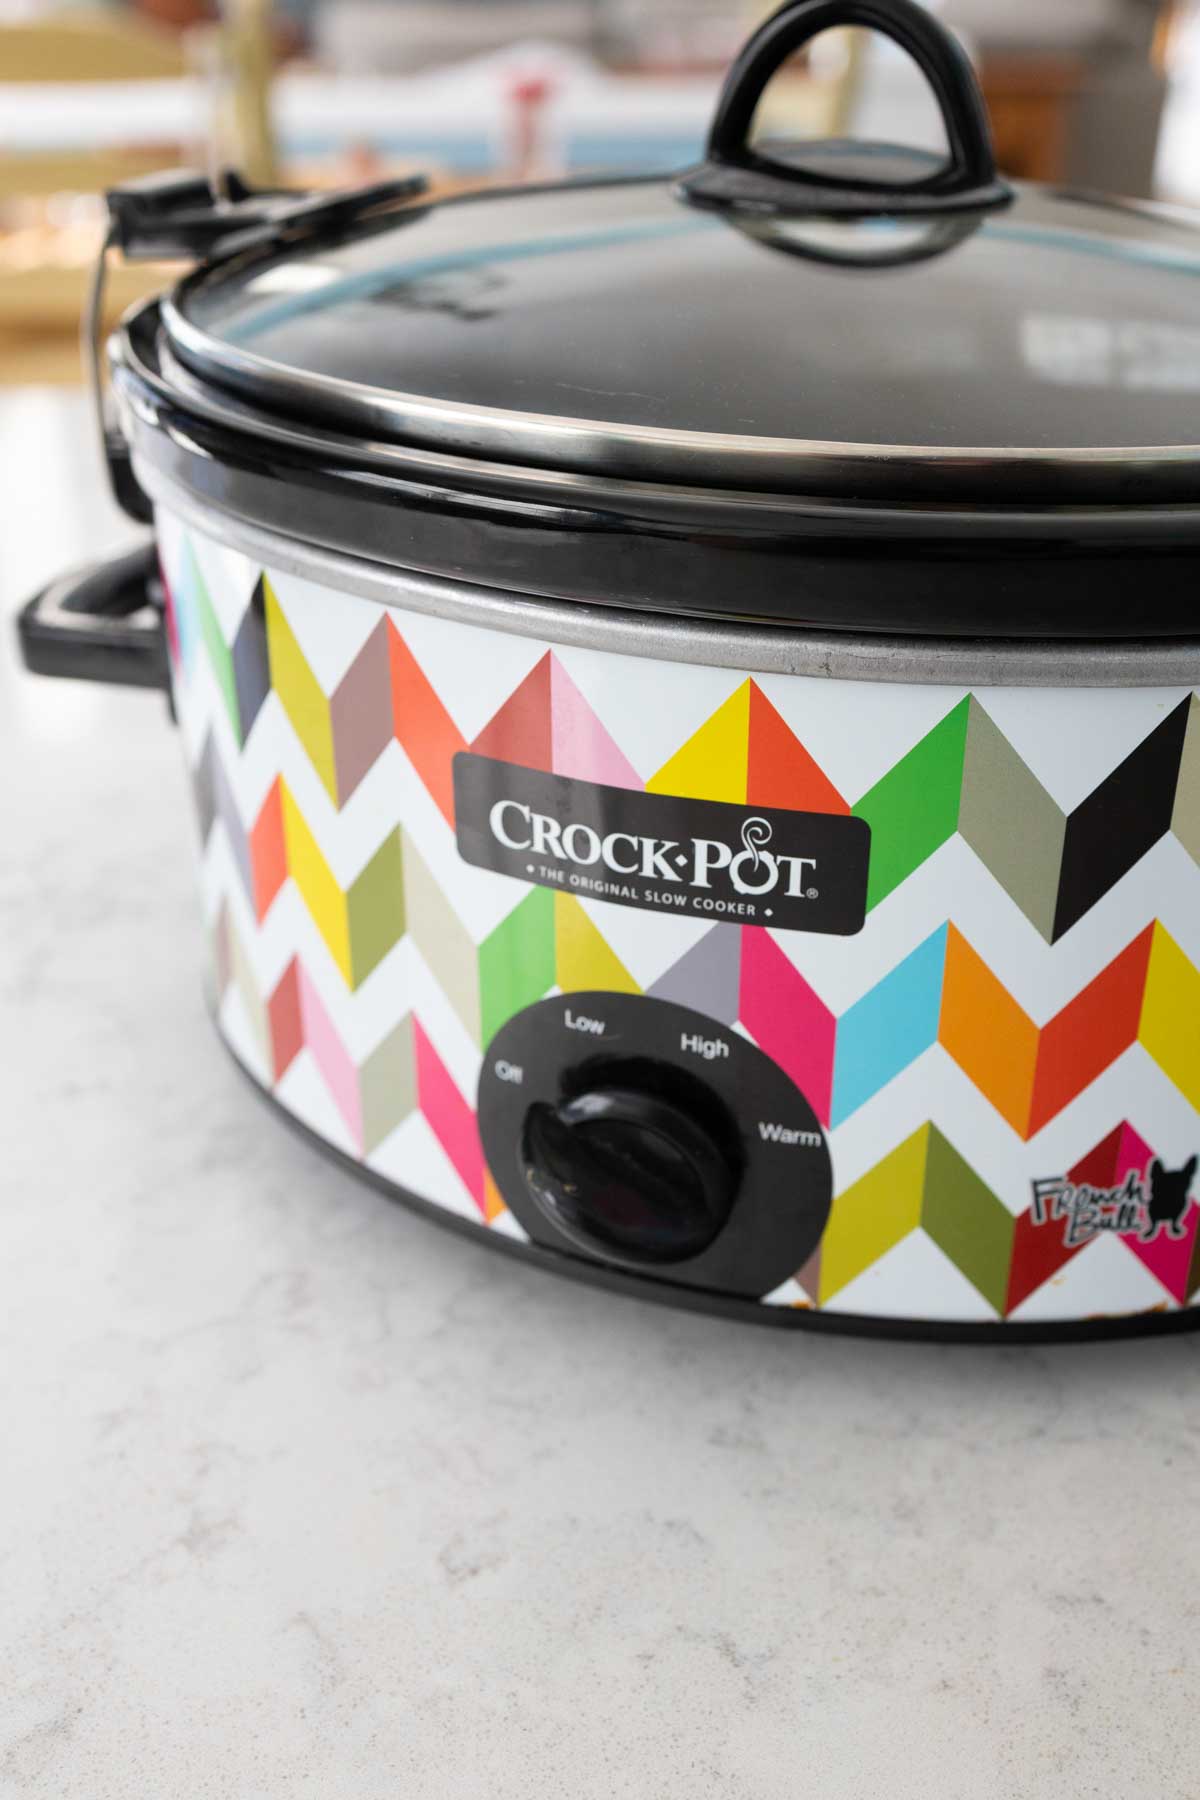 The slowcooker sits on the kitchen counter.